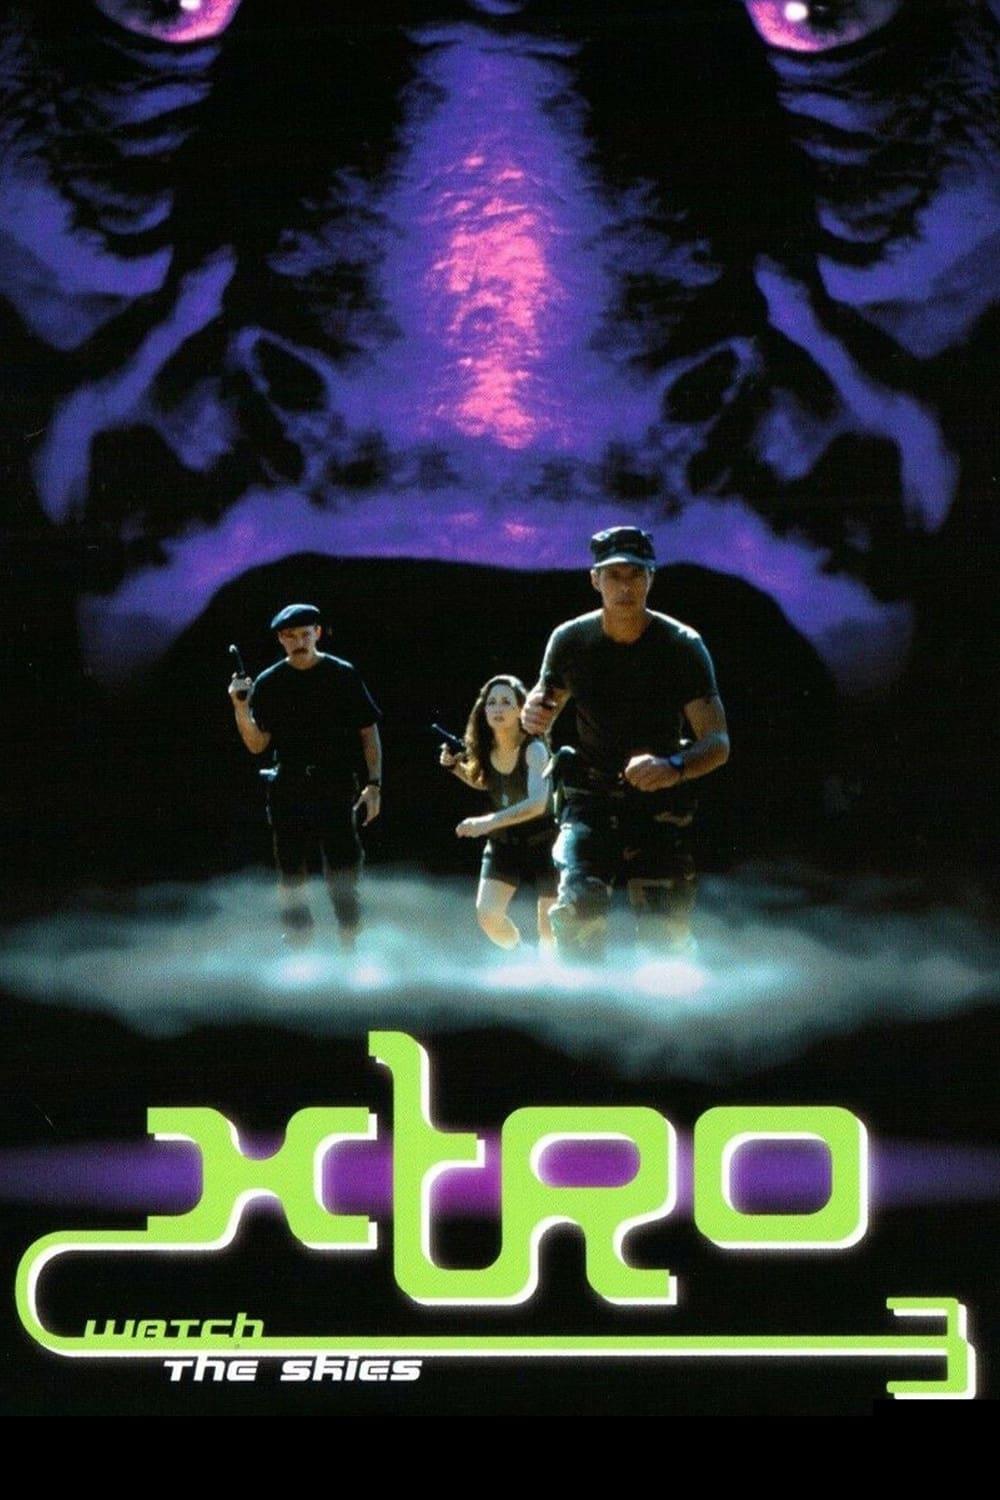 Xtro 3: Watch the Skies poster